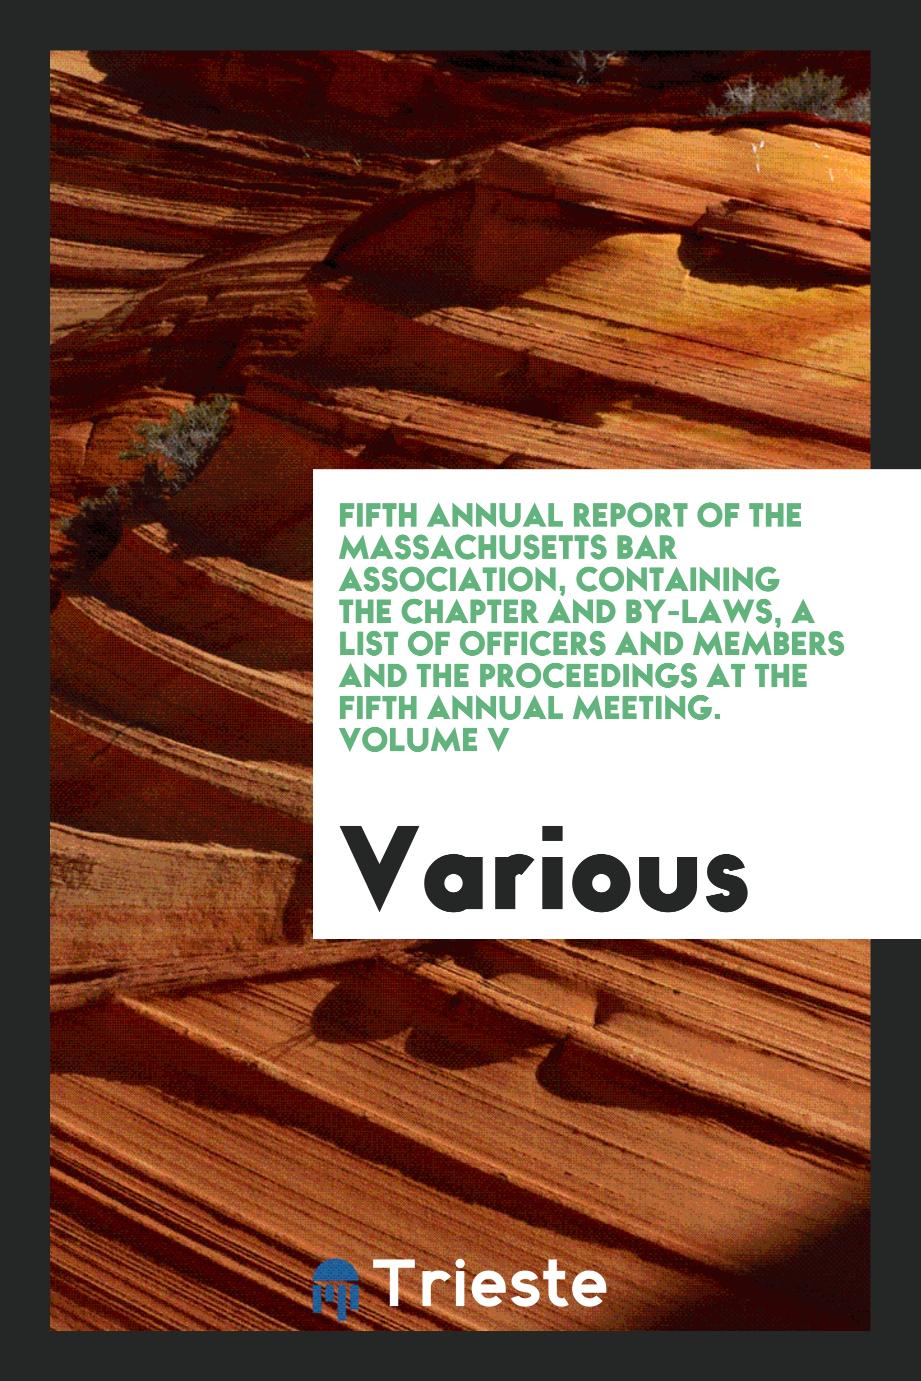 Fifth Annual Report of the Massachusetts Bar Association, Containing the Chapter and By-Laws, a List of Officers and Members and the Proceedings at the Fifth Annual Meeting. Volume V